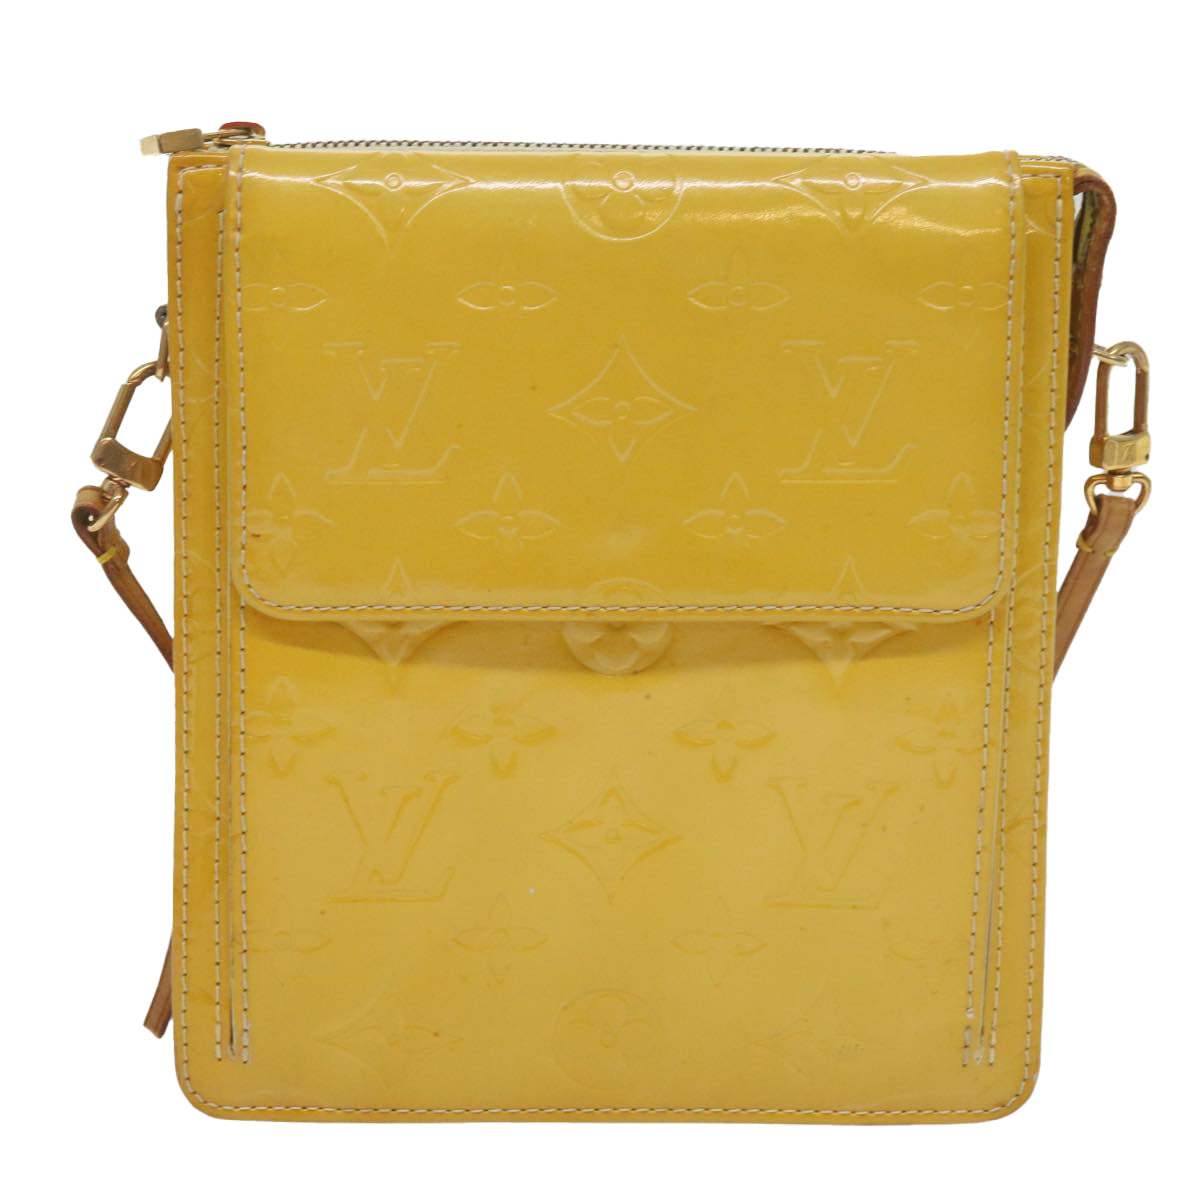 LOUIS VUITTON Monogram Vernis Motto Pouch Lime Yellow M91059 LV Auth bs12692 - 0